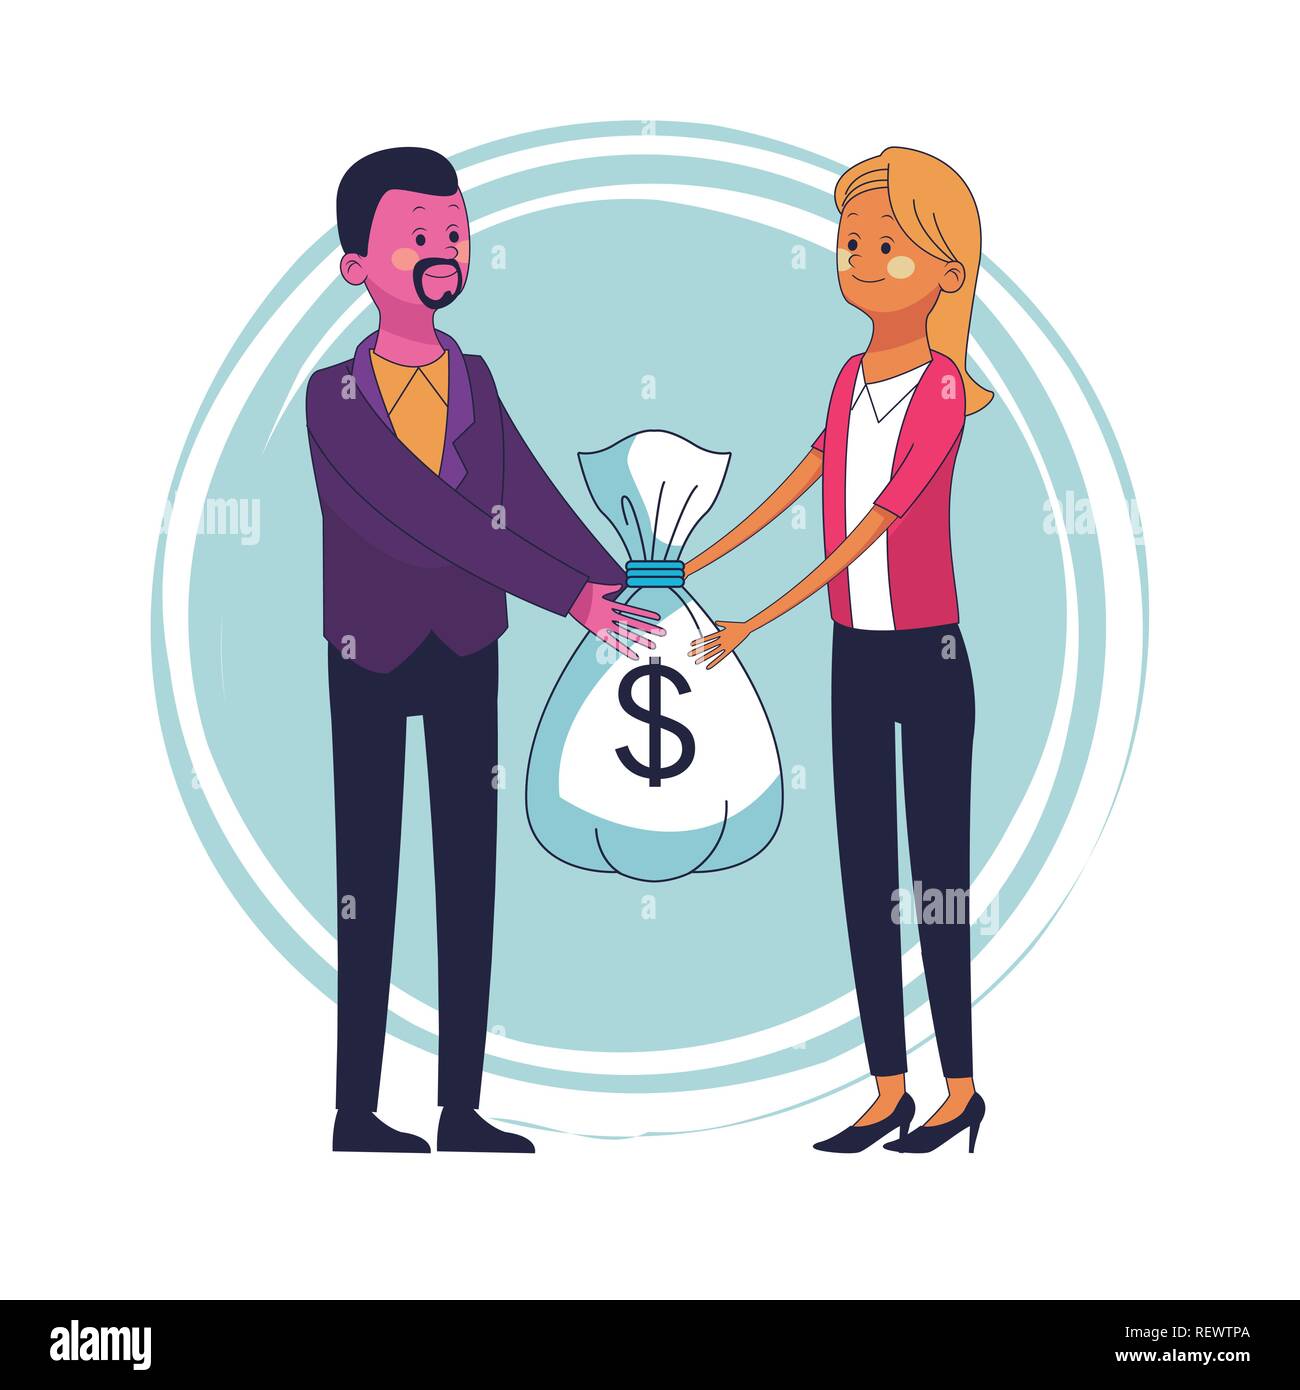 People and business cartoons Stock Vector